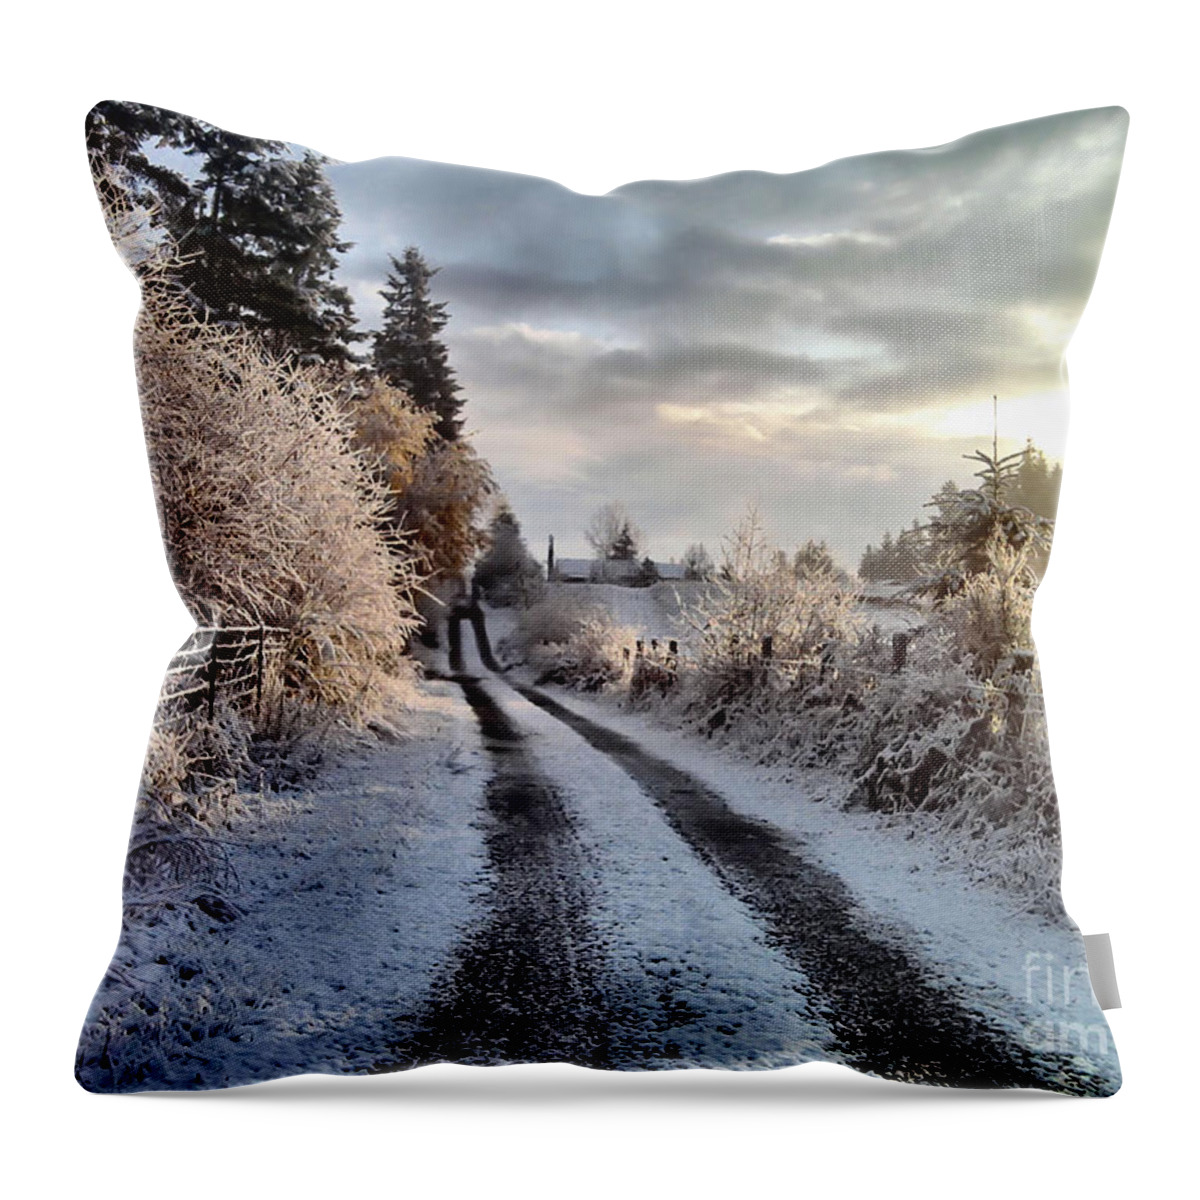 Landscape Throw Pillow featuring the photograph The Way Home by Rory Siegel